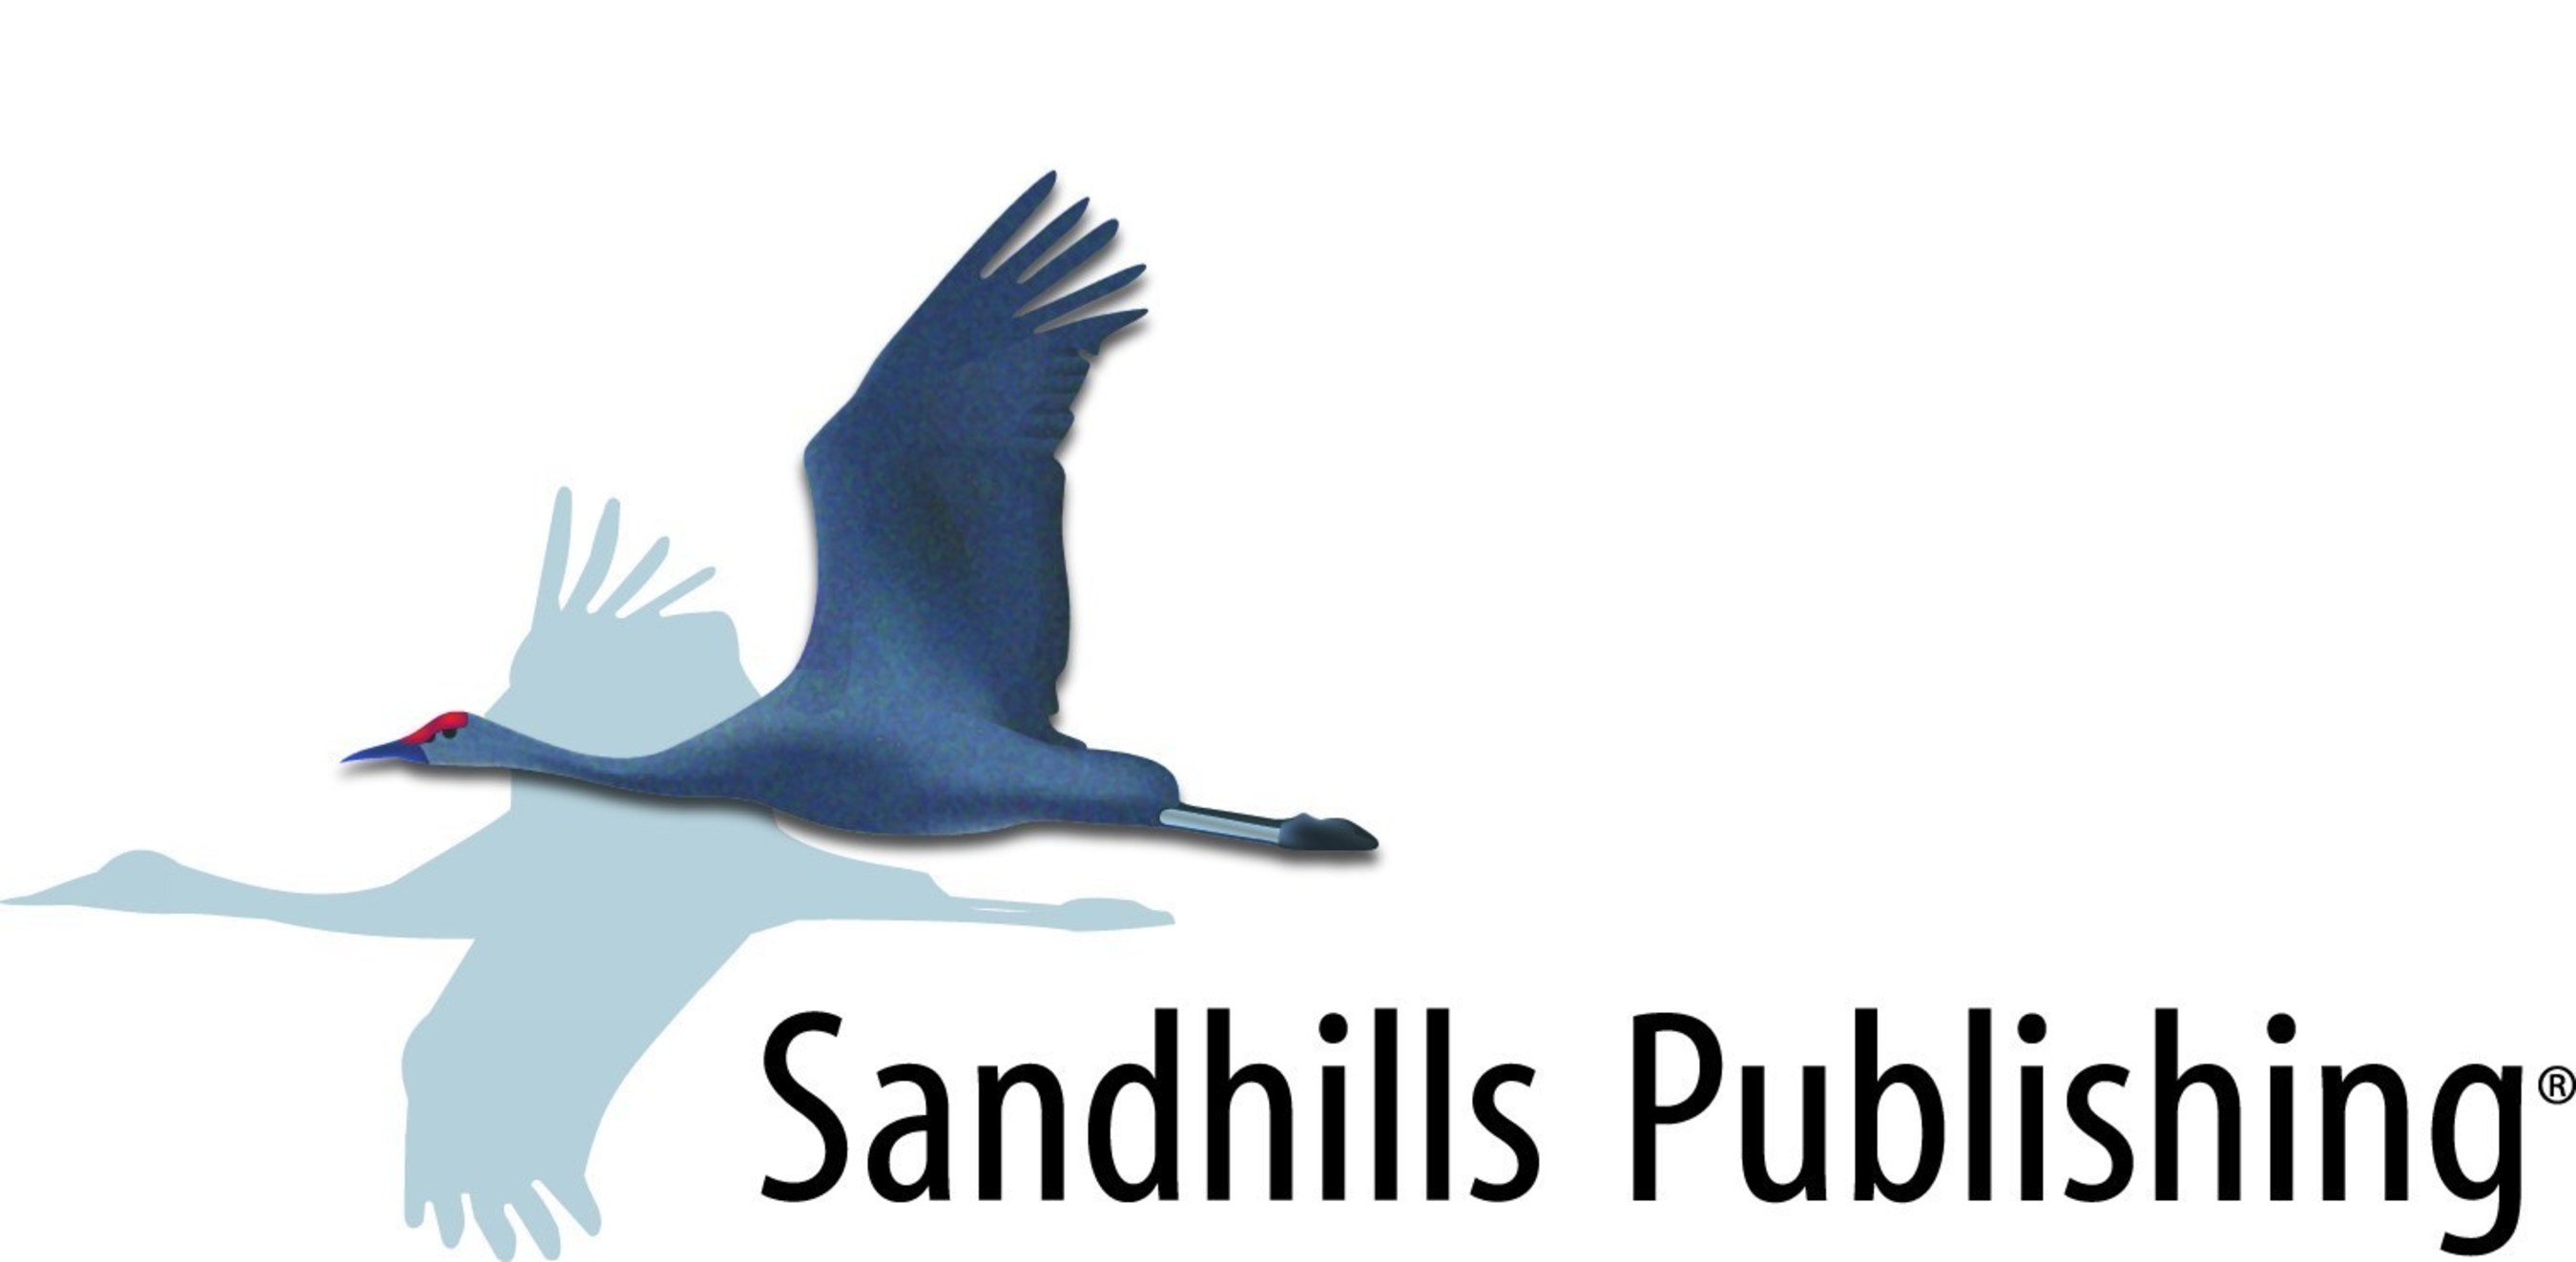 Sandhills Publishing - we are the cloud.  www.sandhills.jobs (PRNewsFoto/Sandhills Publishing)